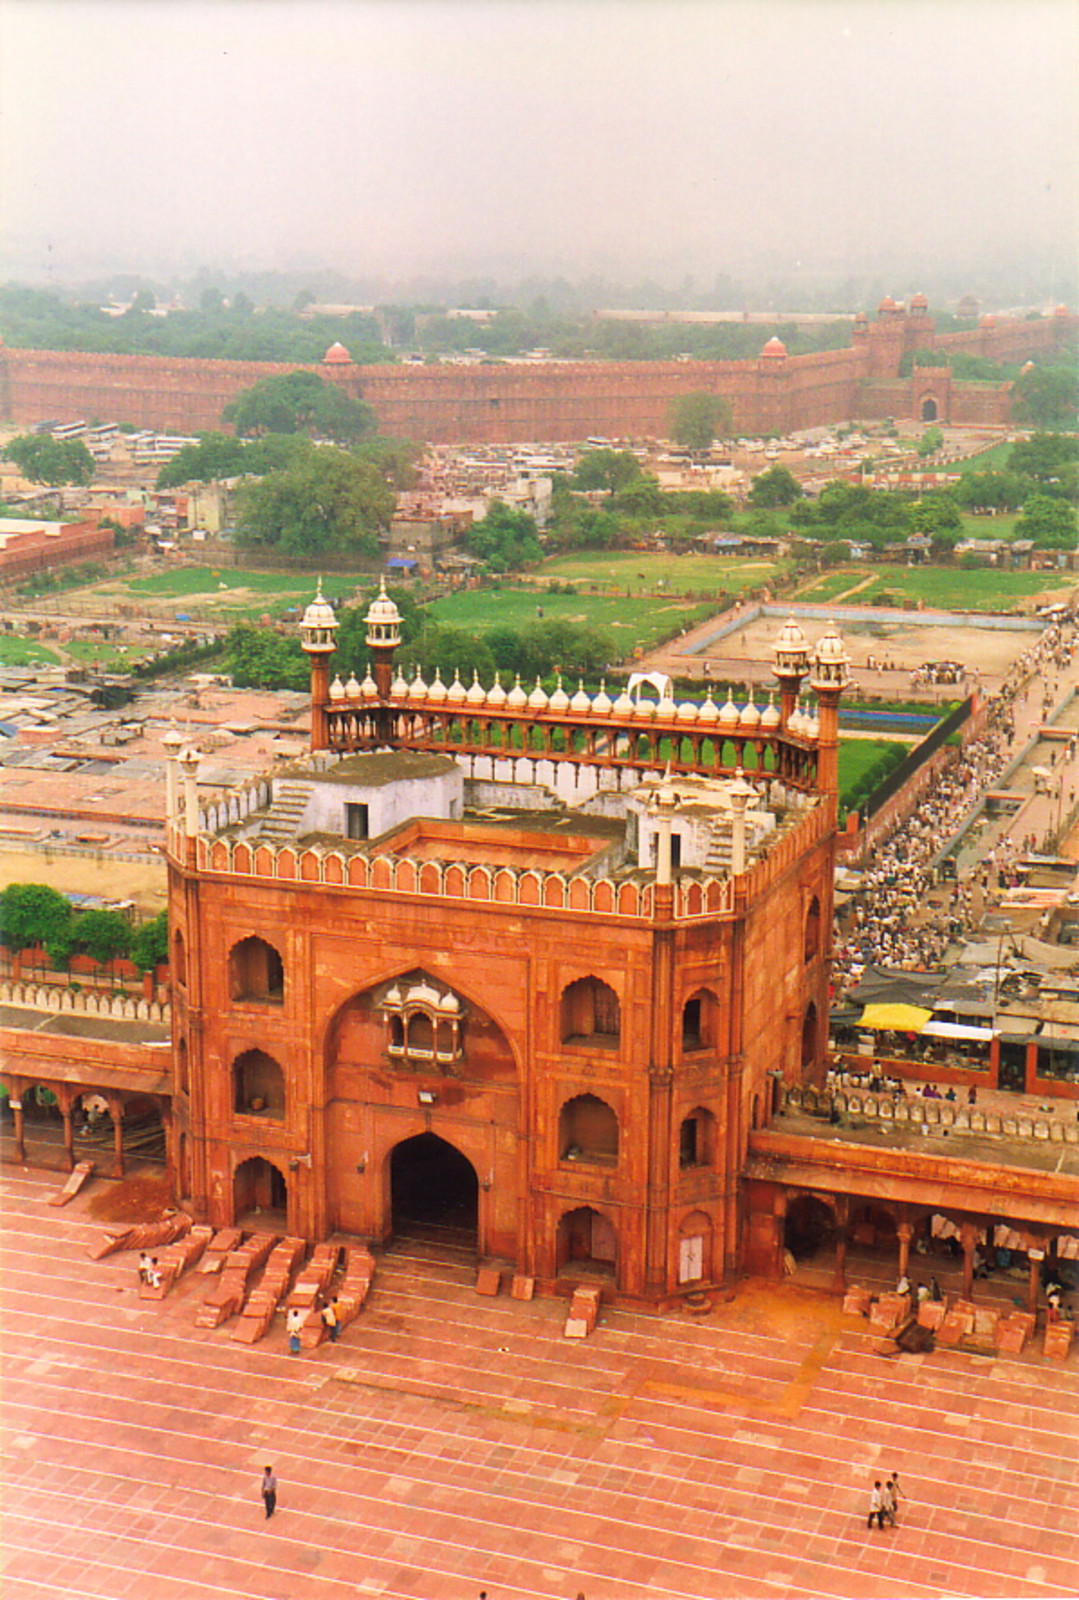 The view from above the Jama Masjid